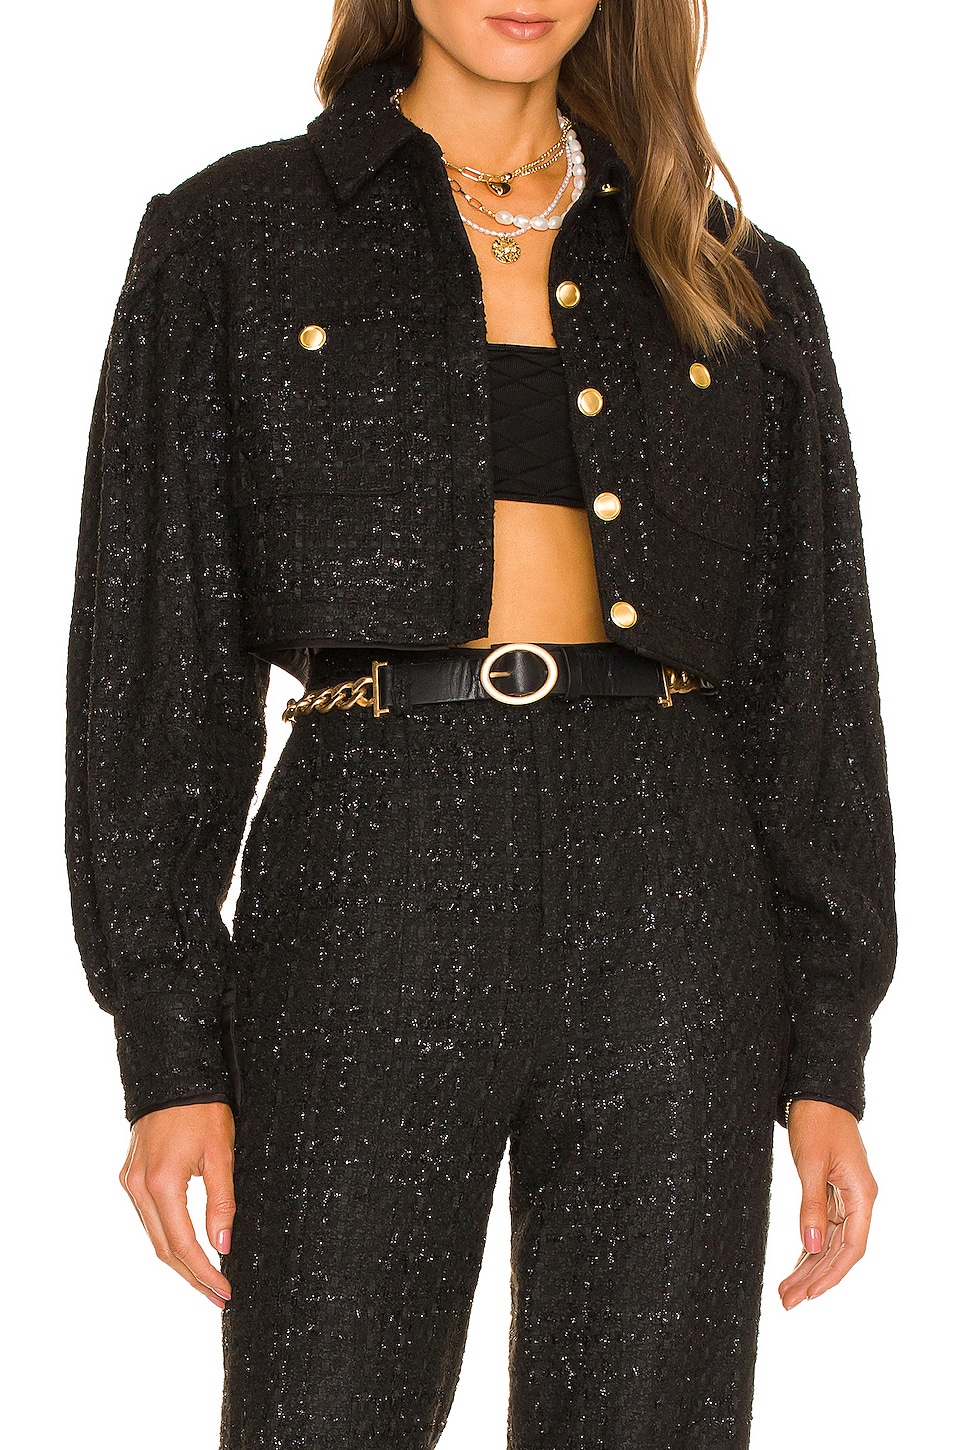 ASSIGNMENT Tiana Chain Belt in Black